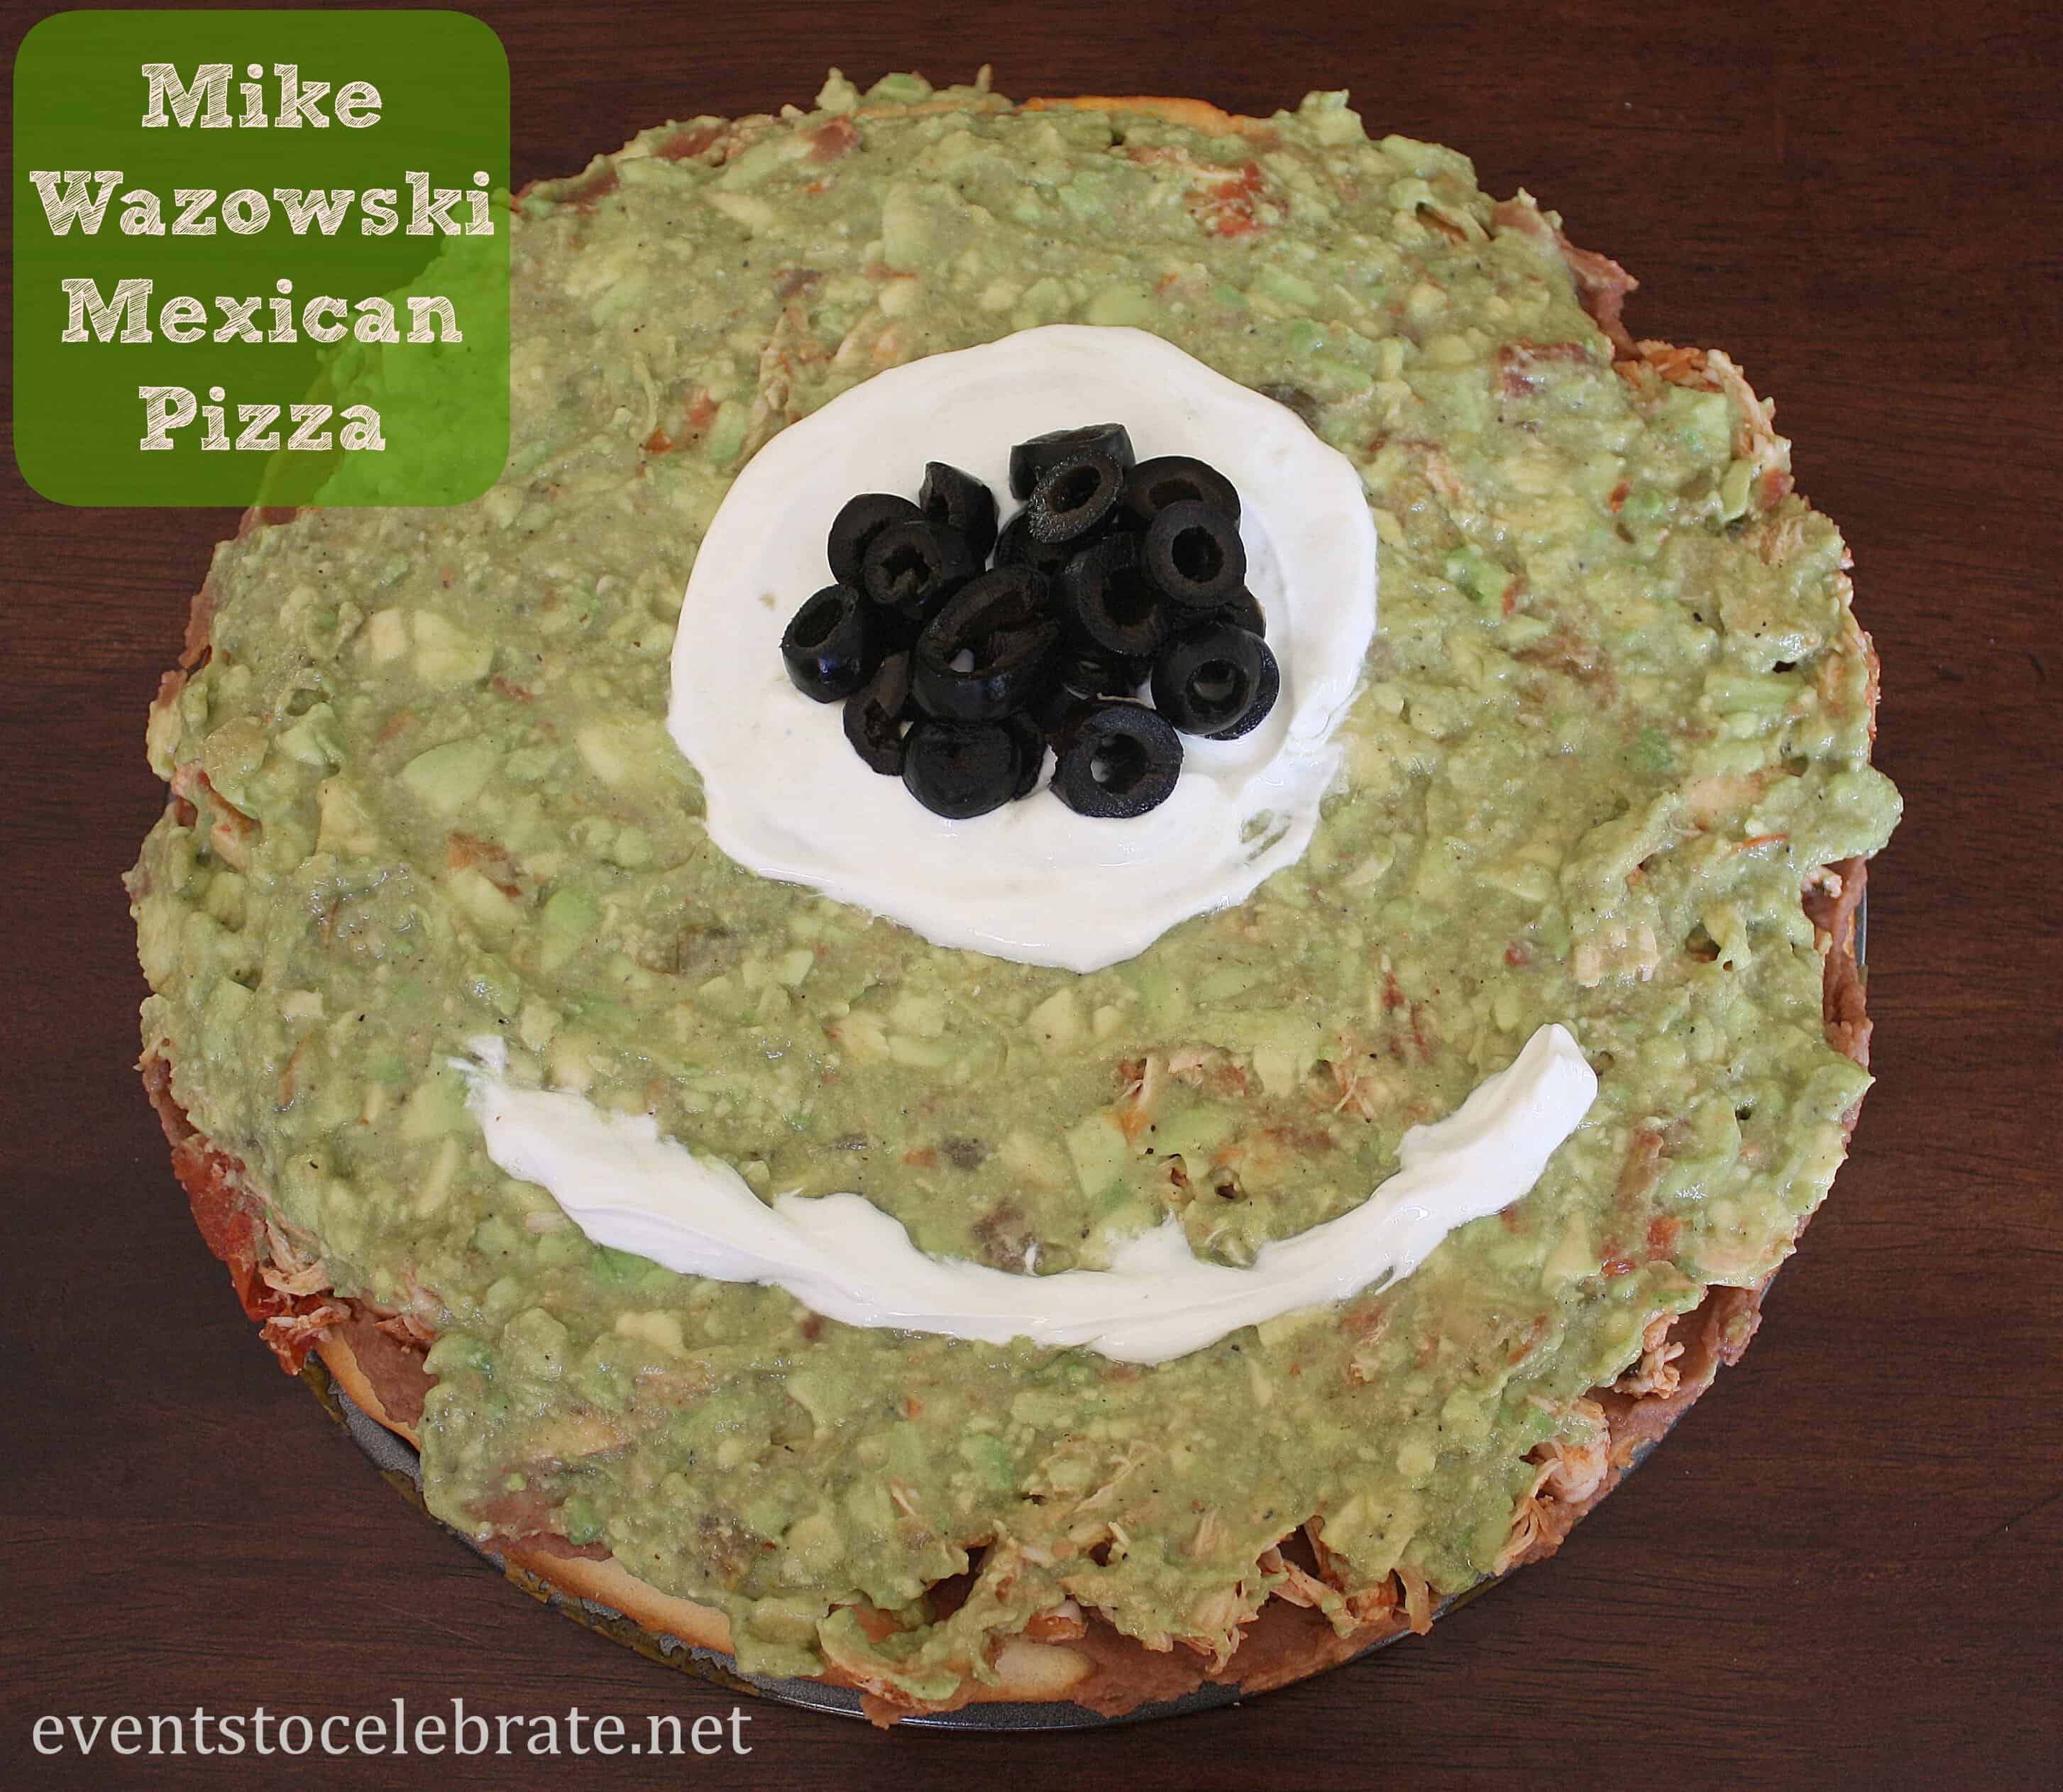 Monsters University Party - Mike Wazowski Mexican Pizza